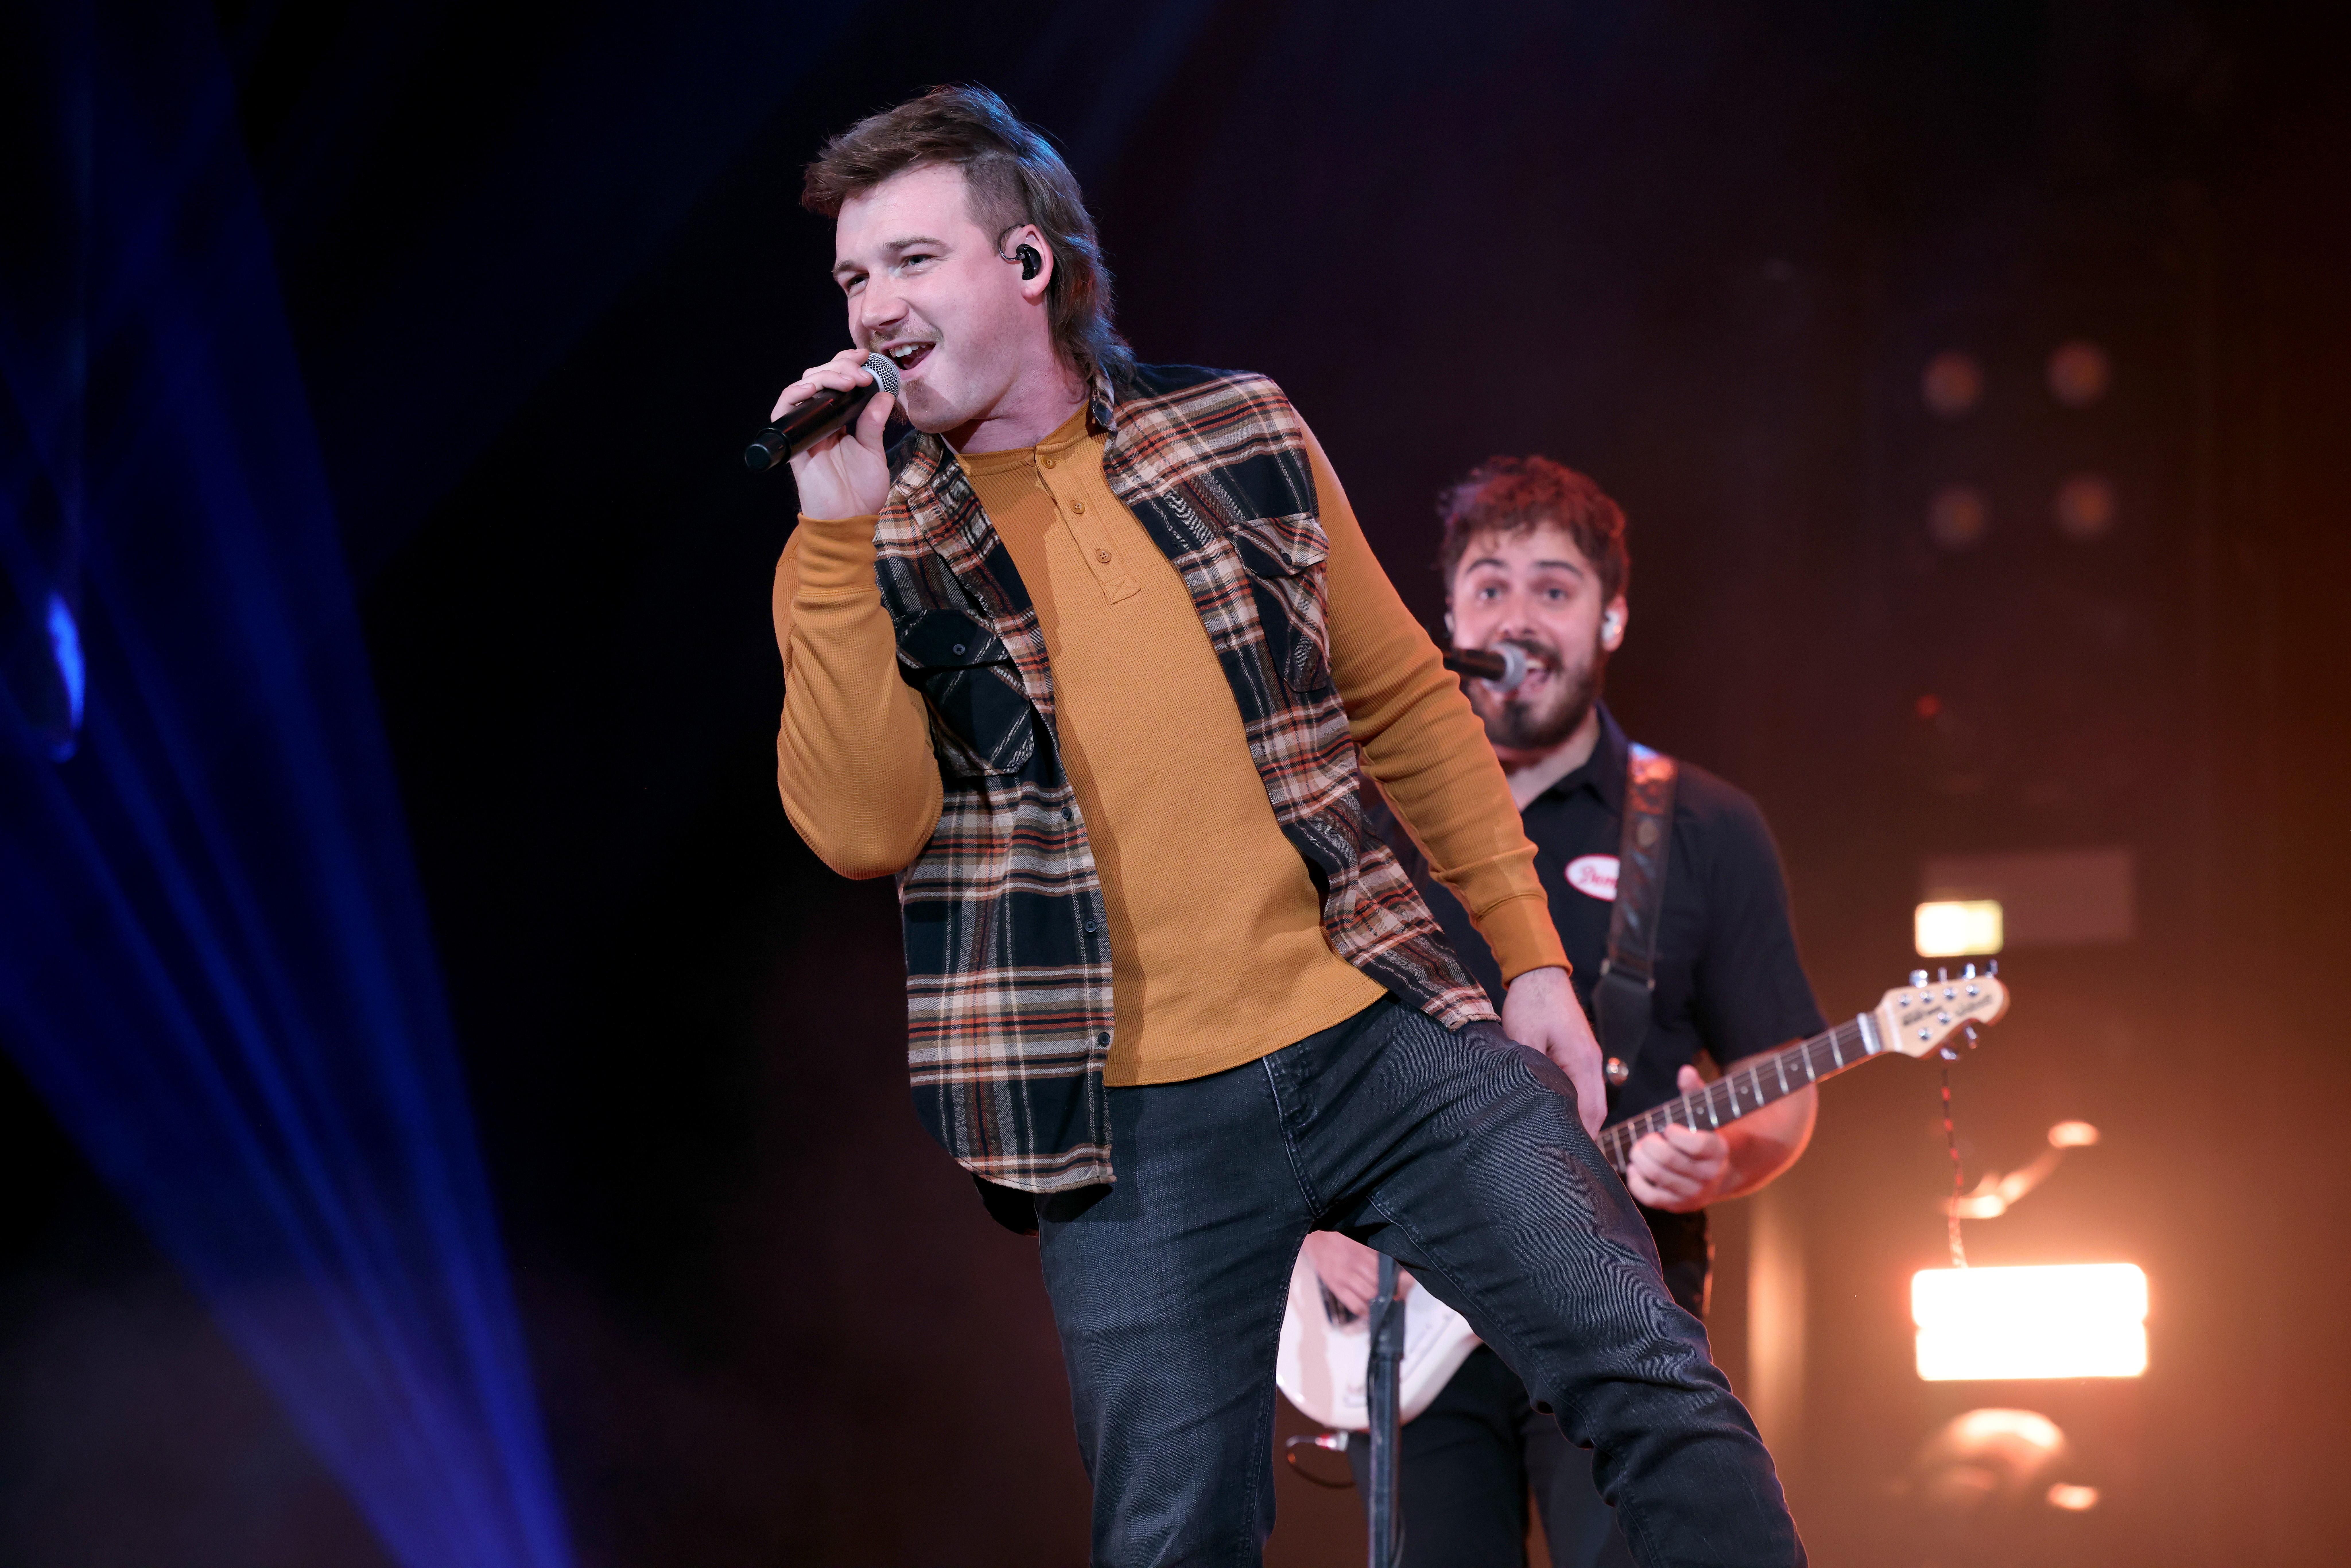 Country Singer Morgan Wallen Is Caught on Video Saying the N-Word, His Music and Image Wiped from Radio and Streaming Services